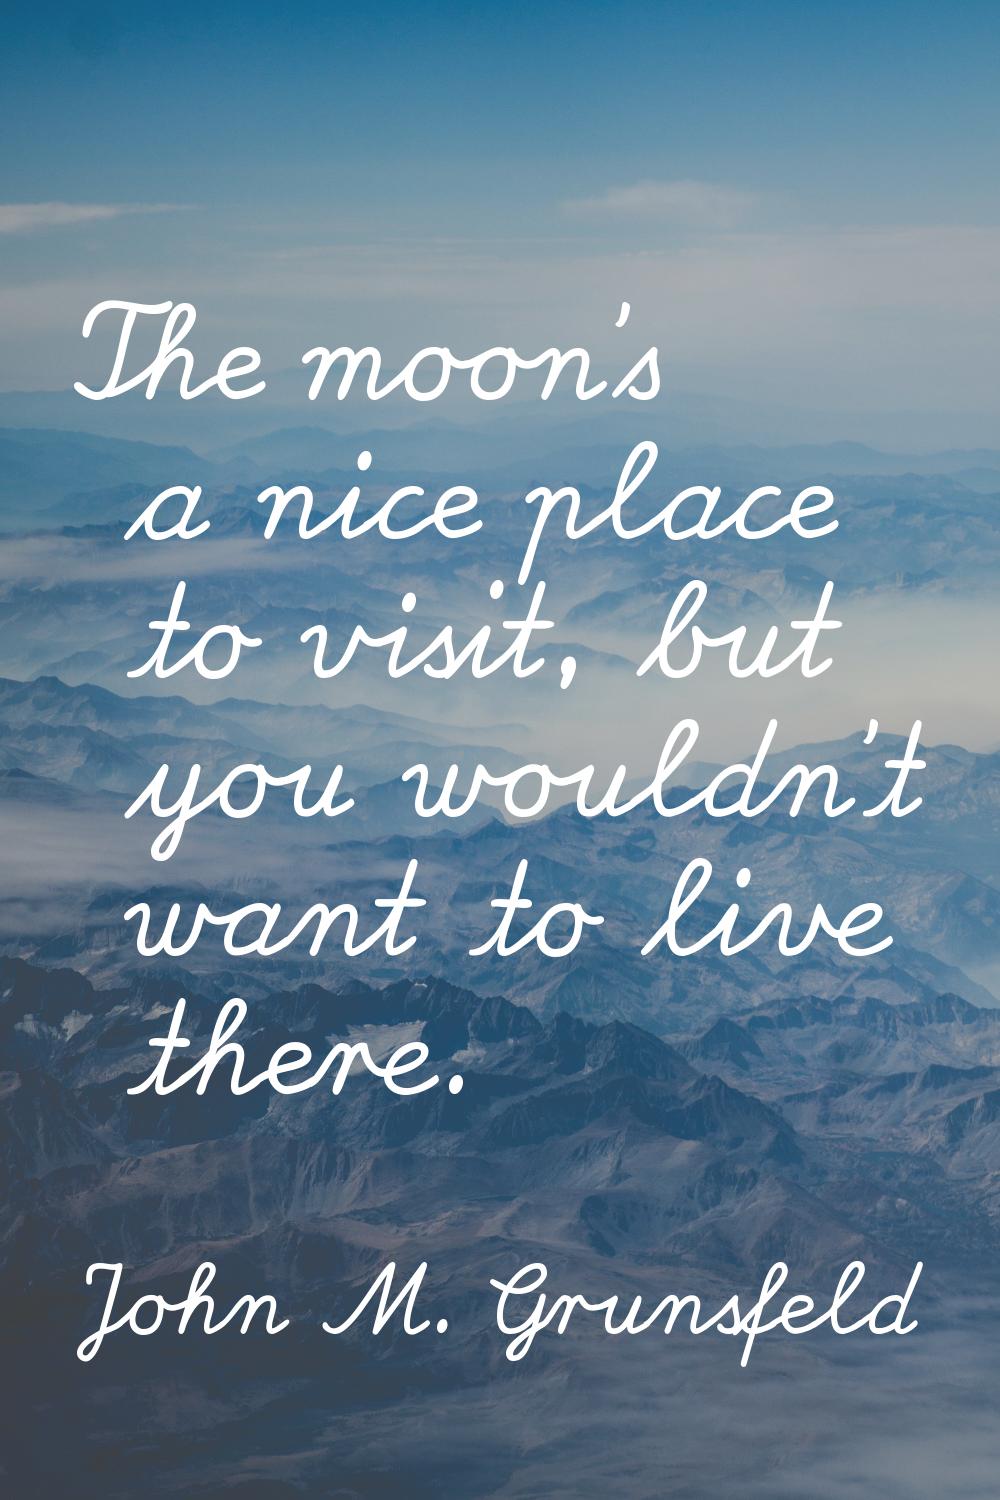 The moon's a nice place to visit, but you wouldn't want to live there.